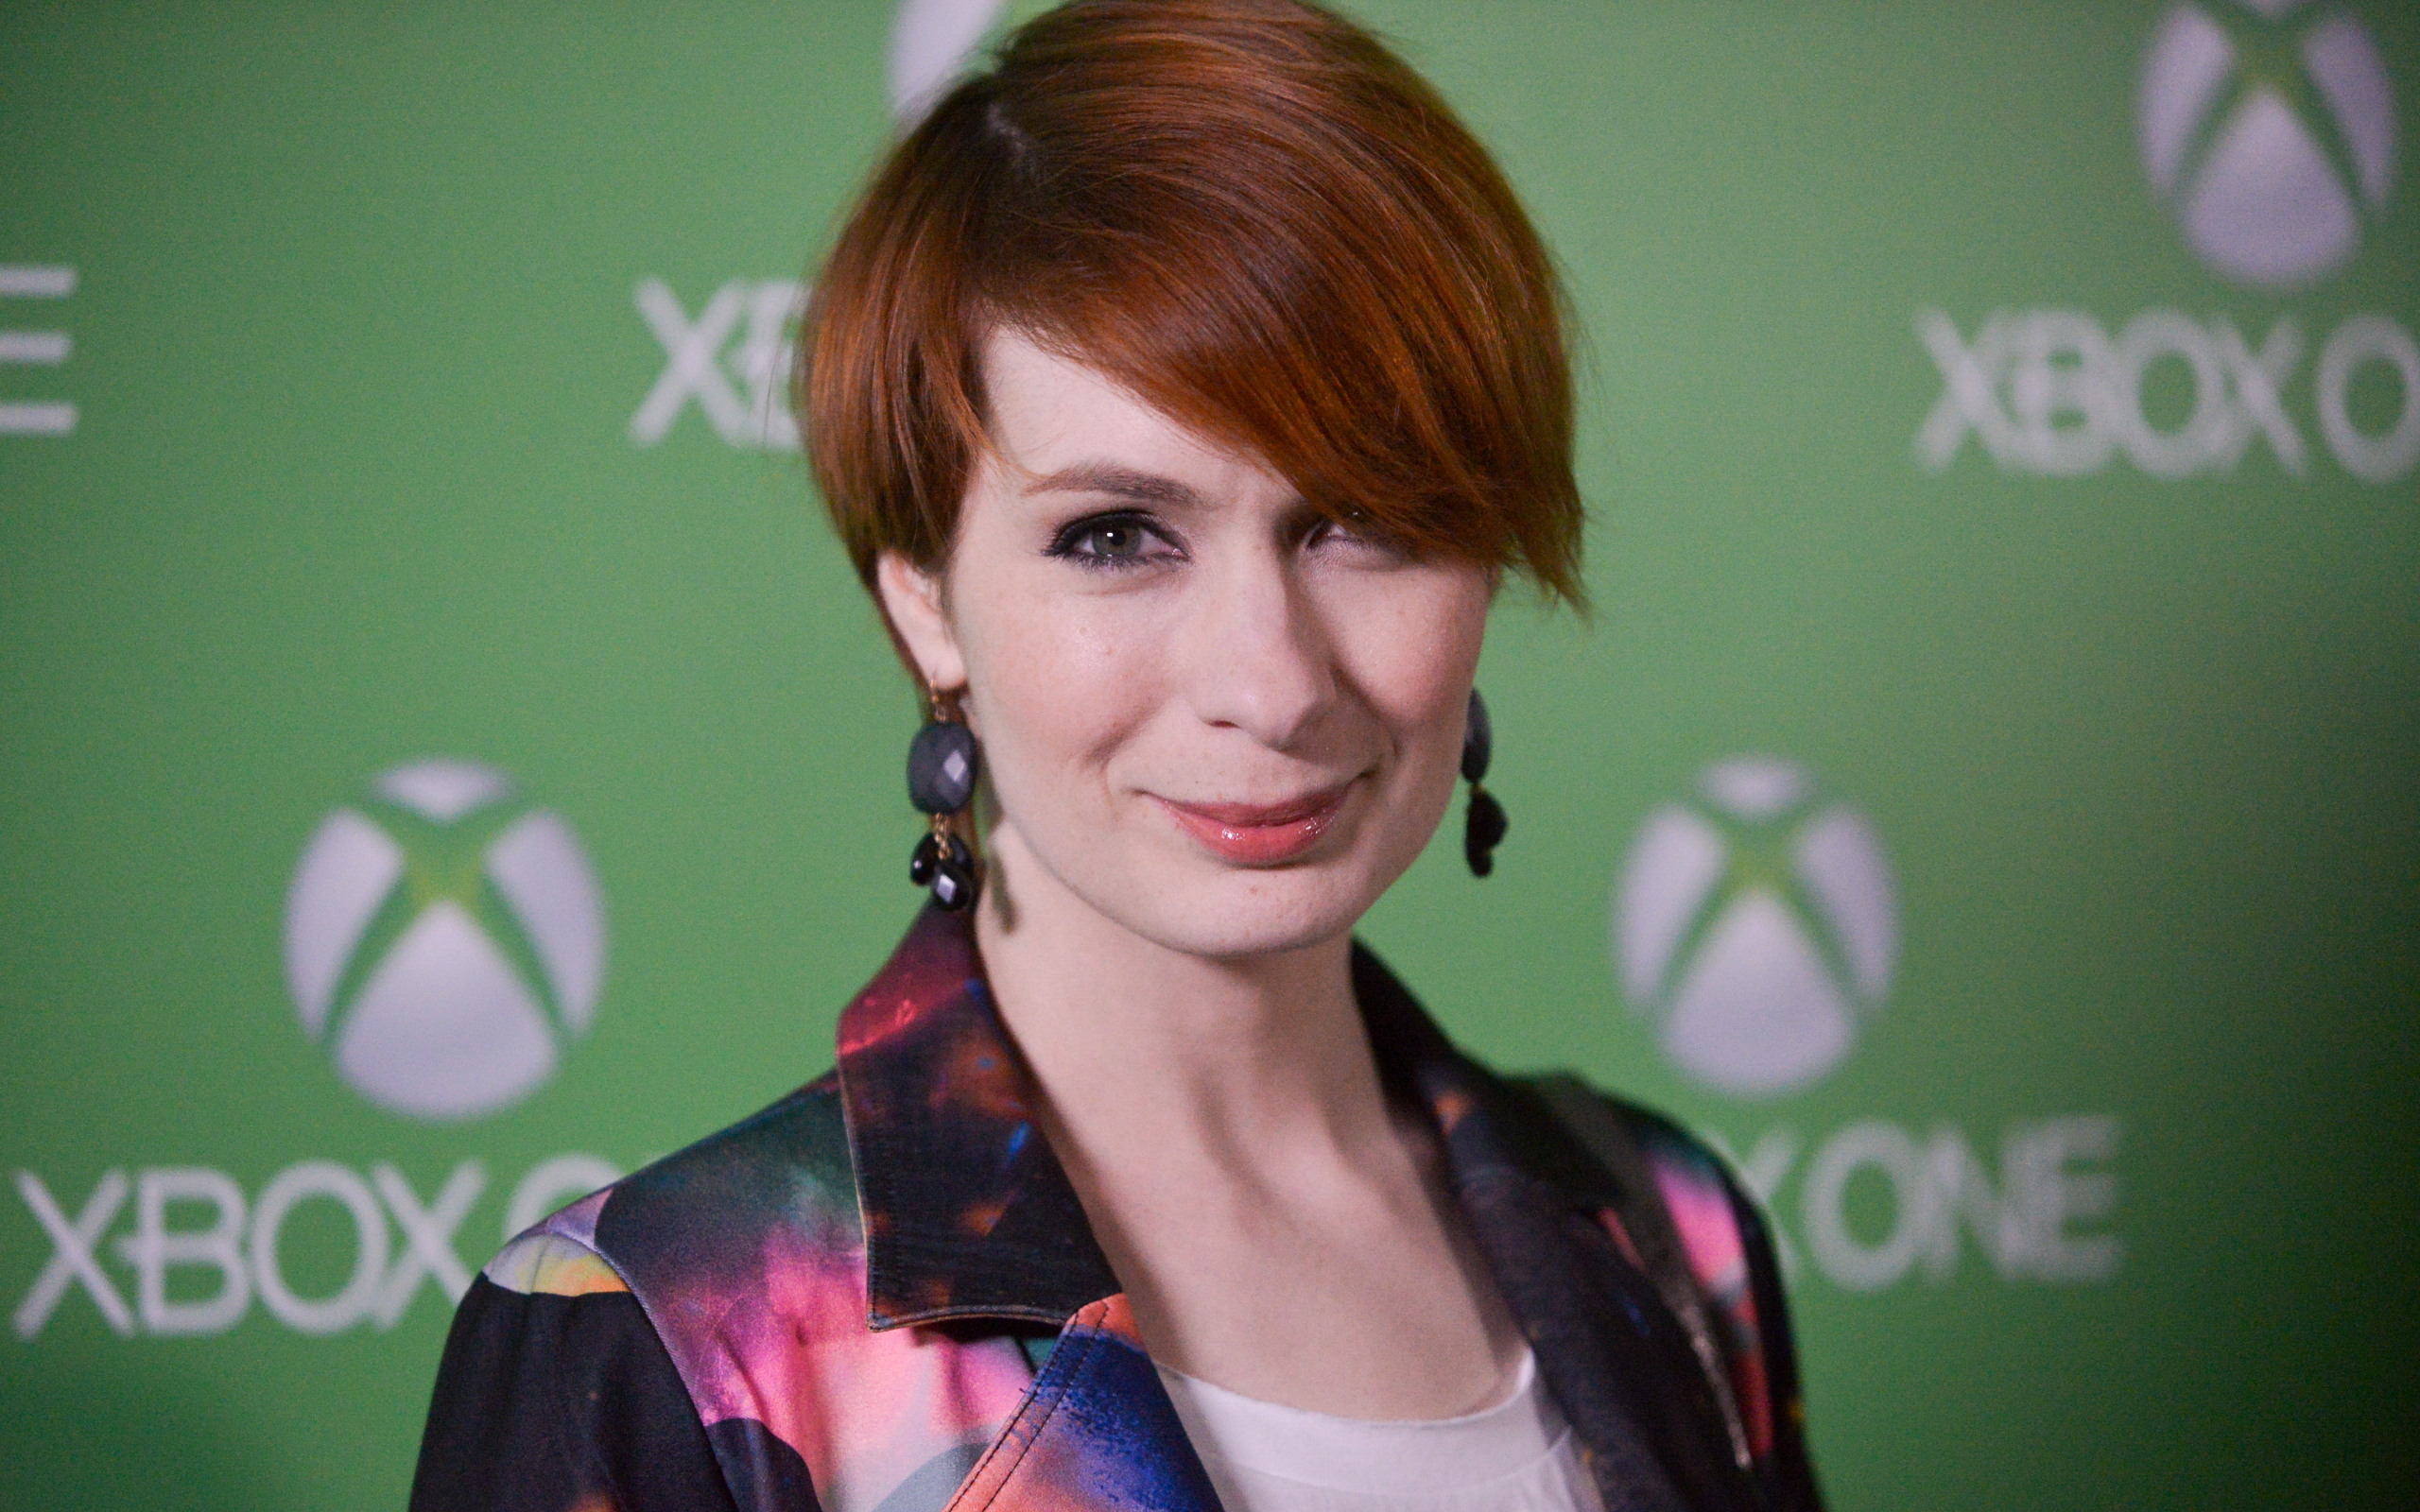 Celebrity Felicia Day HD Wallpaper Background Image.